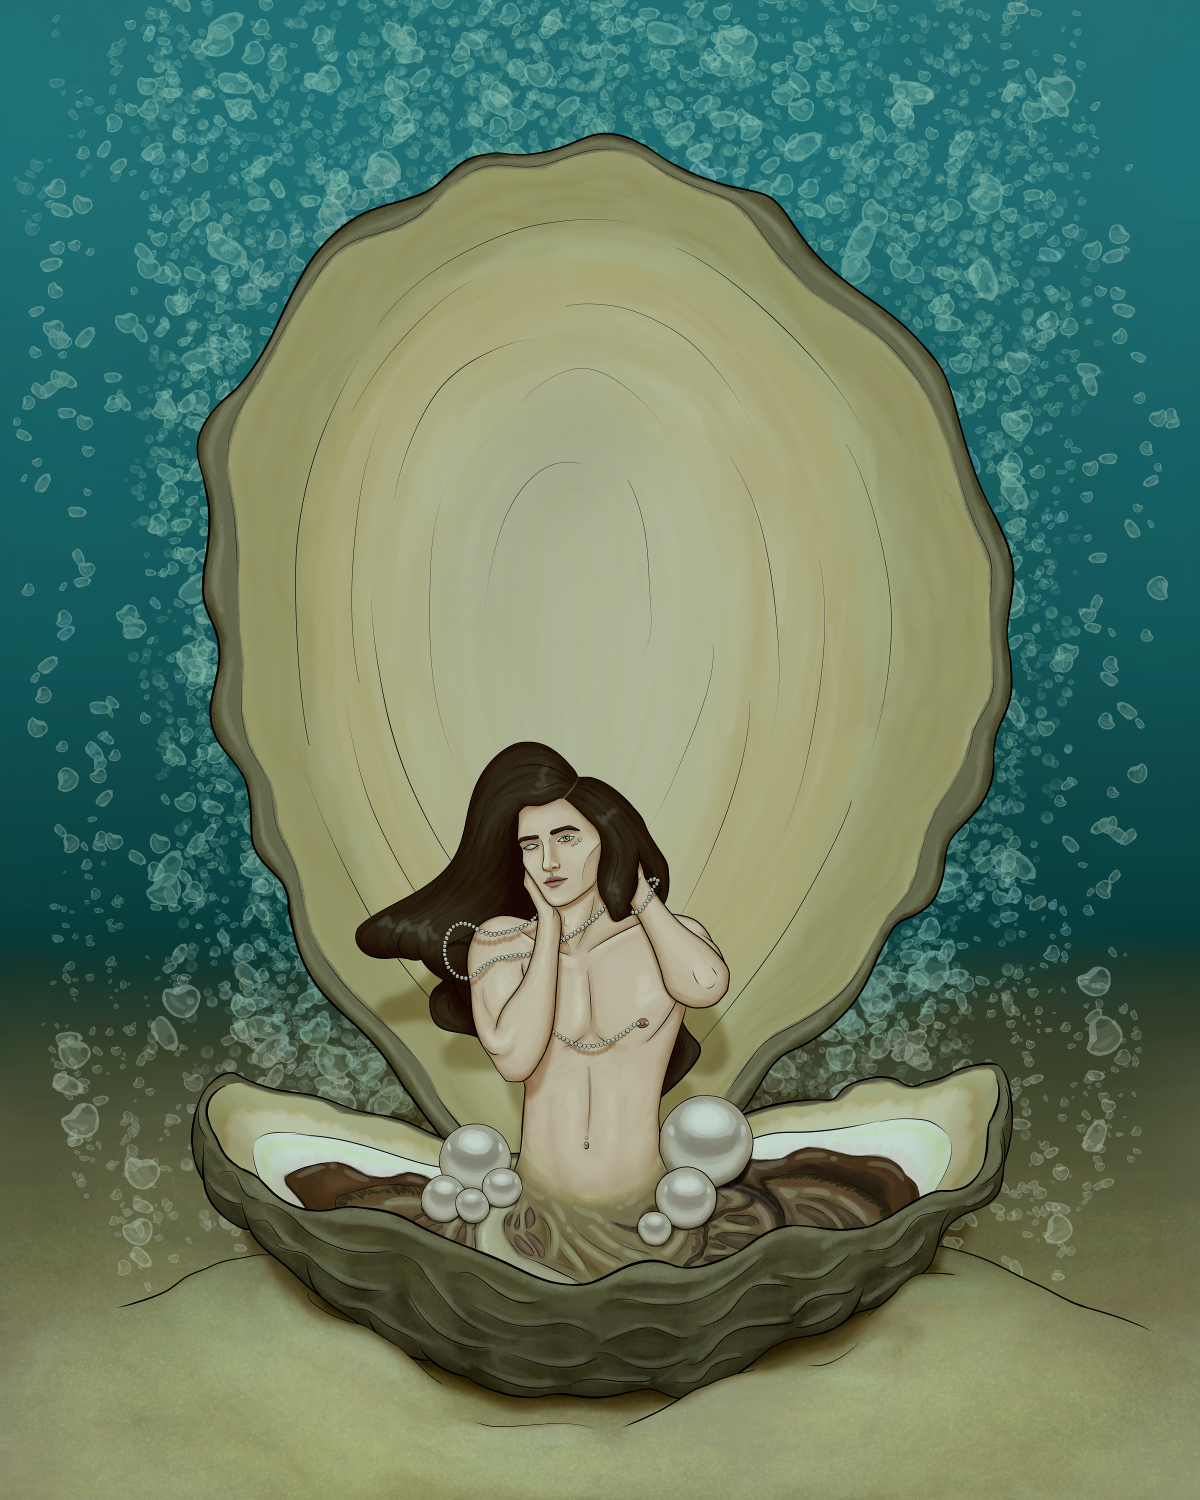 Digital art of a giant oyster shell open with a man's torso connected to the goop inside. He has fair skin and long dark brown hair that is flowing luxuriously in the water. He is posing seductively with one hand on his face, the other on his neck, his head tilted just a bit to the side and down. All his jewelry is pearls, a necklace, a bracelet, nipple piercings that are connected with a string of more pearls, belly button piercing, three anti-eyebrow piercings (under the eye), one above his top lip in the middle. One of his eyes is a pearl with a small scar under it. Seven pearls ranging from pool ball to volleyball size are resting next to his torso inside the shell. He's underwater in a pile of sand with a wall of bubbles behind him.